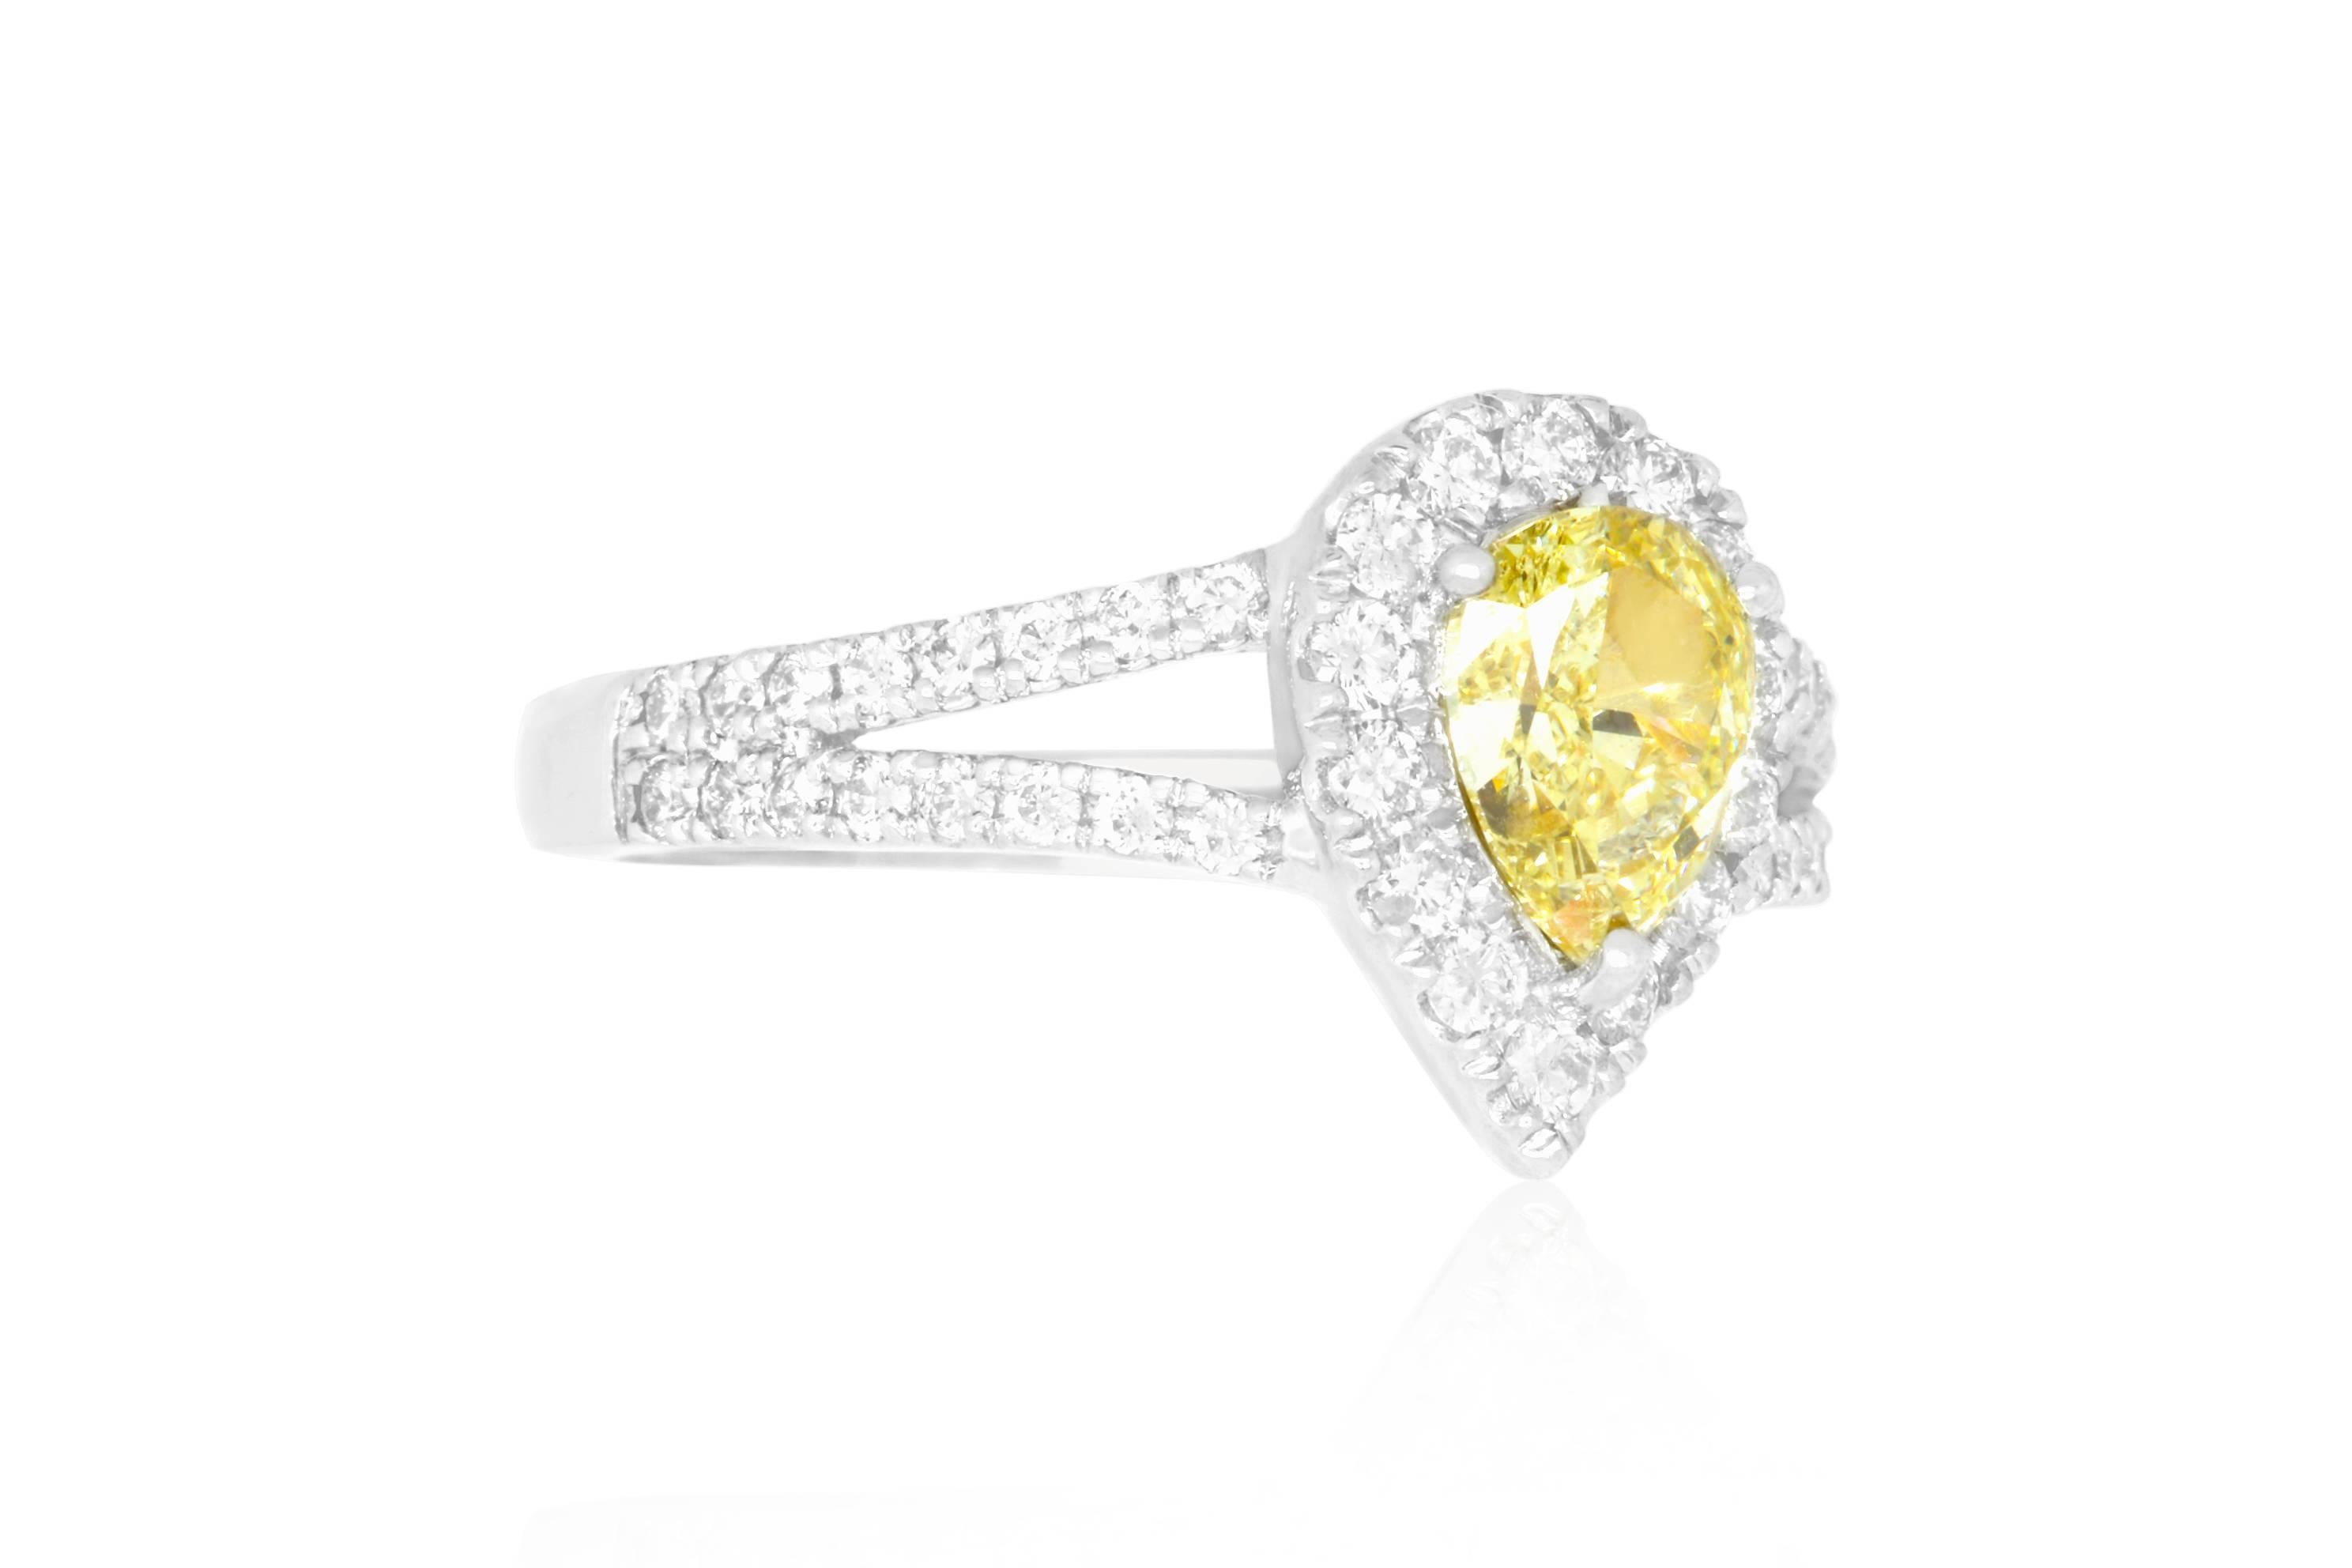 18k White Gold
Yellow Diamond: 1.00 ct.t.w
Diamond: 0.57 ct.t.w; color/clarity: HI/SI
Ring Size: Size 7. Alberto offers complimentary sizing on all rings.

Fine one-of-a kind craftsmanship meets incredible quality in this breathtaking piece of